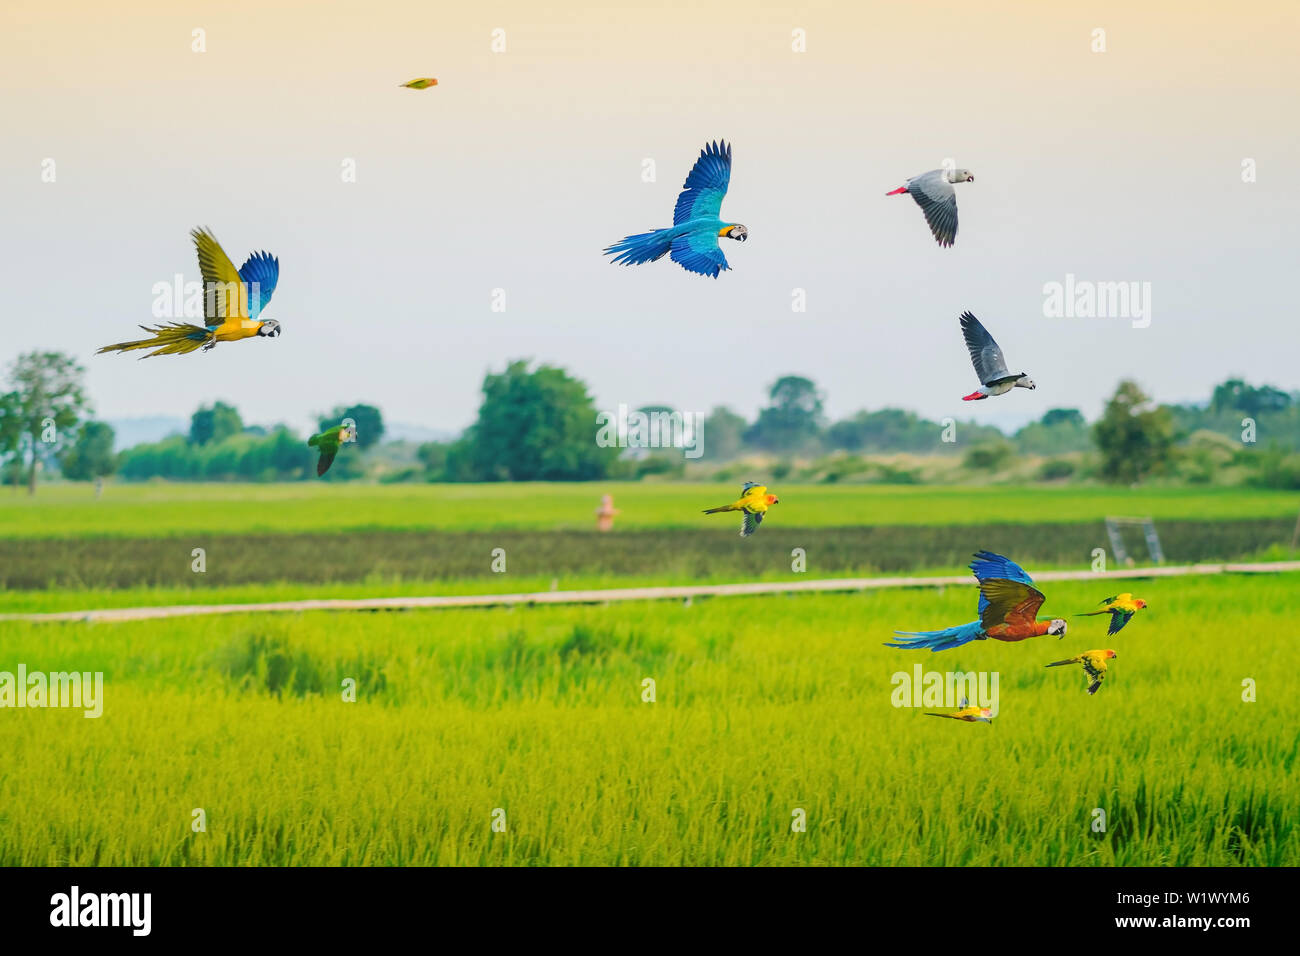 Colorful of the macaw parrot practice flying in the fields. Stock Photo